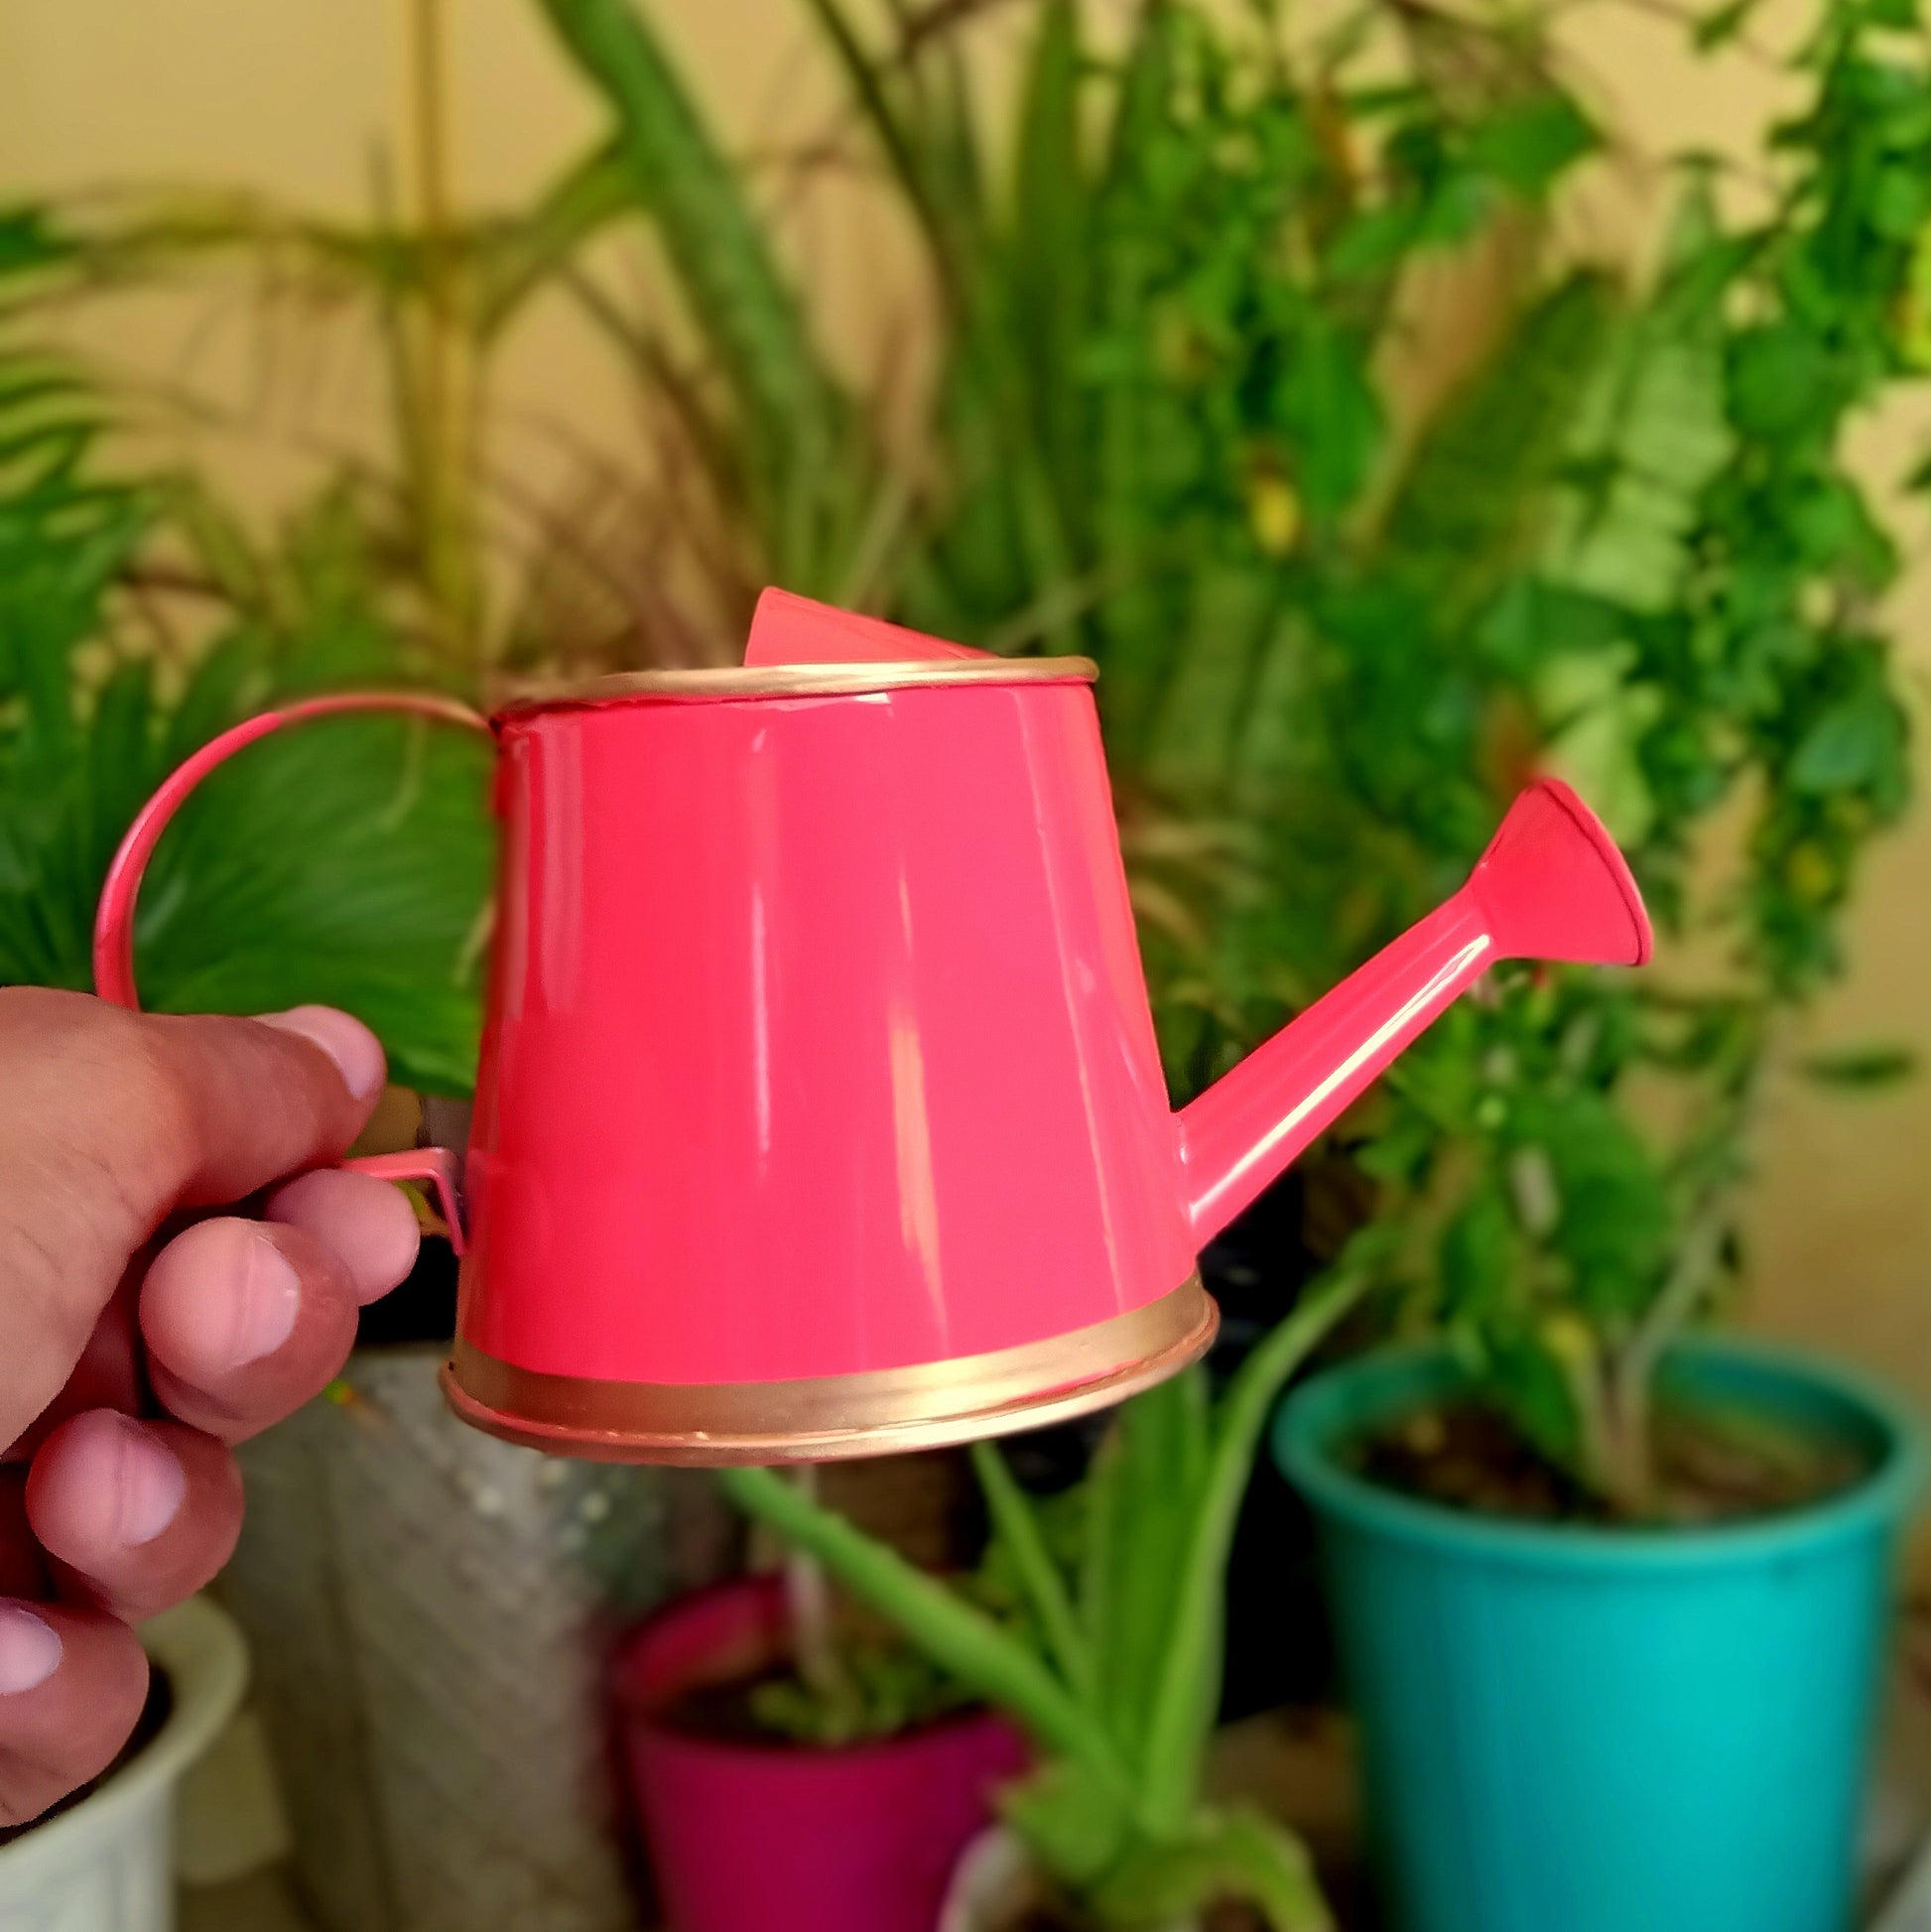 ecofynd 250 ml Pink Watering Can with Gold Border for Kids Watering Can freeshipping - Ecofynd